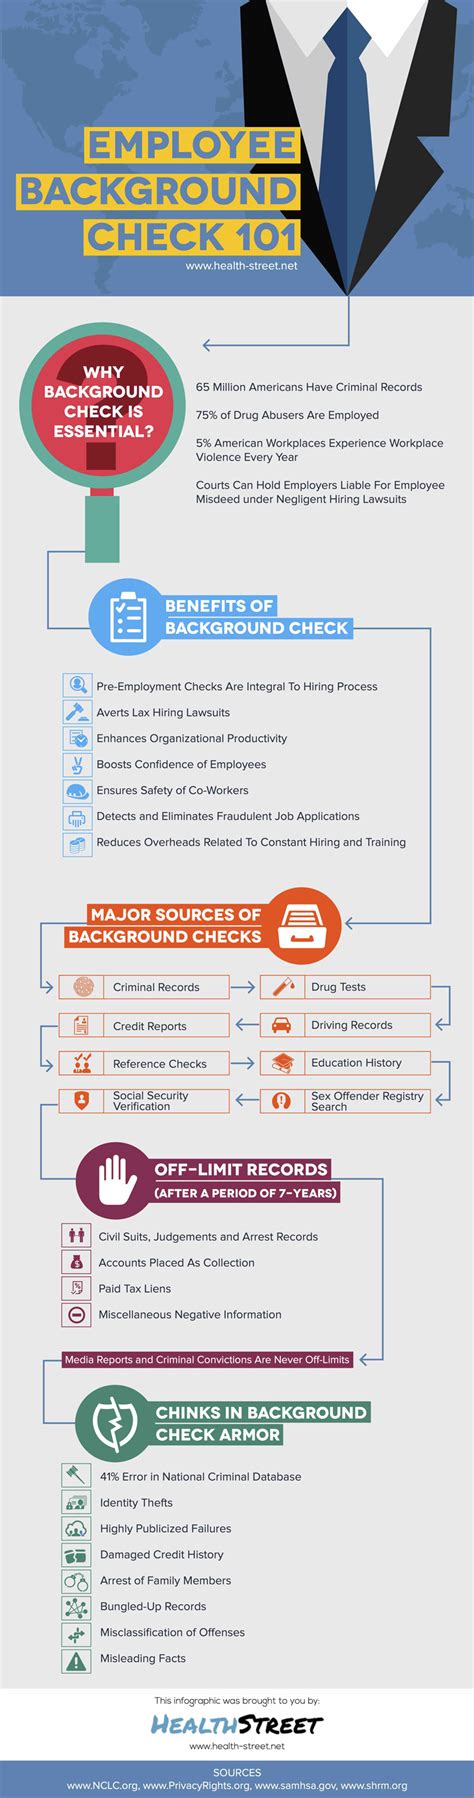 Employee Background Check 101 Infographic